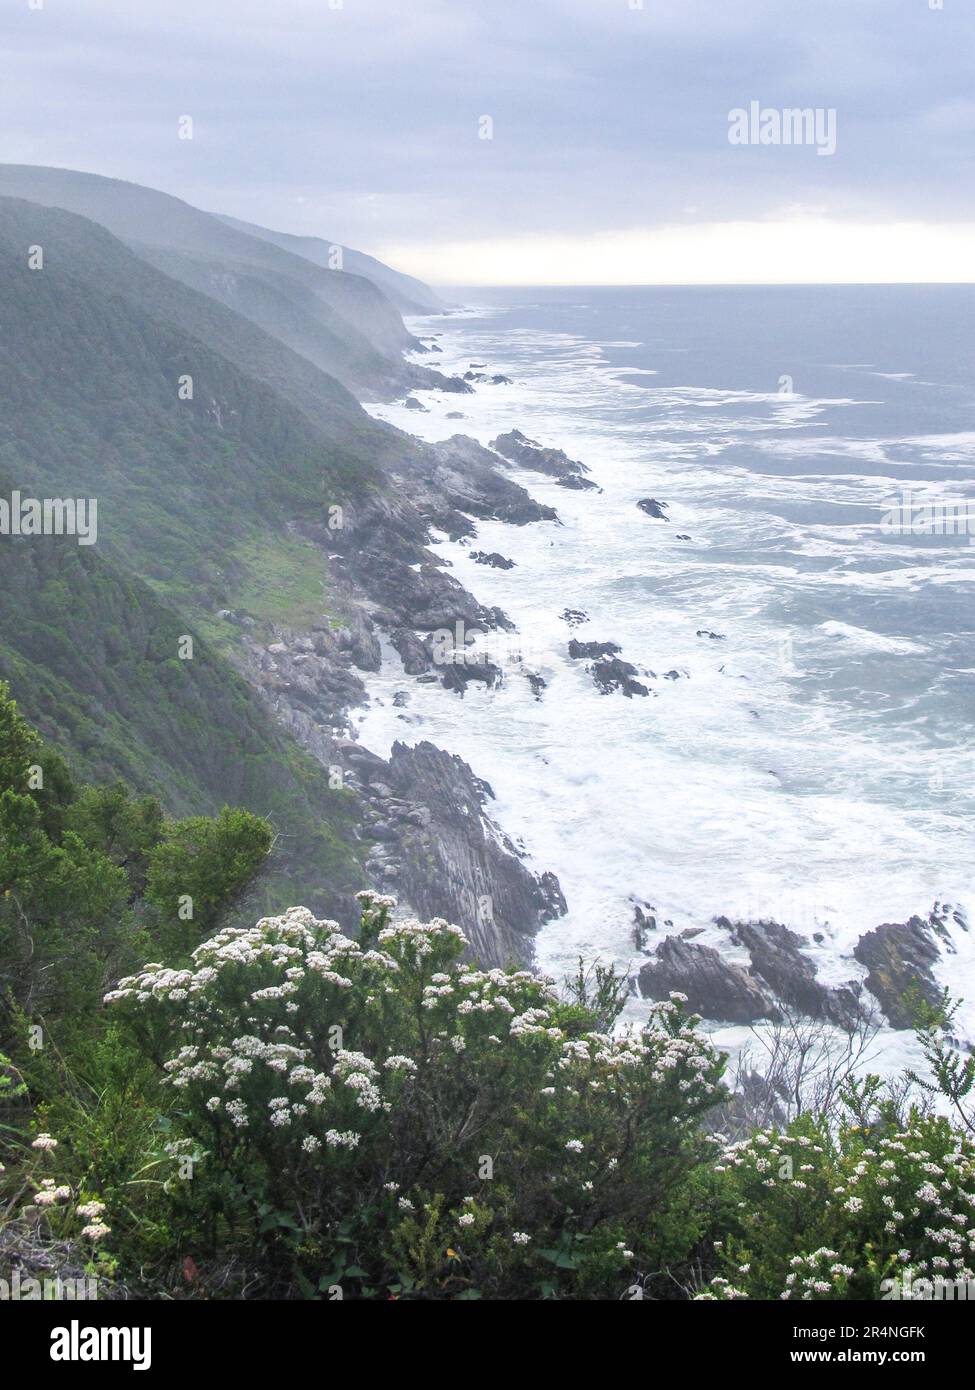 Looking down the mountainous Tsitsikamma Coastline, South Africa, on a cold overcast and misty day, with white Erica Philica in the fore ground Stock Photo